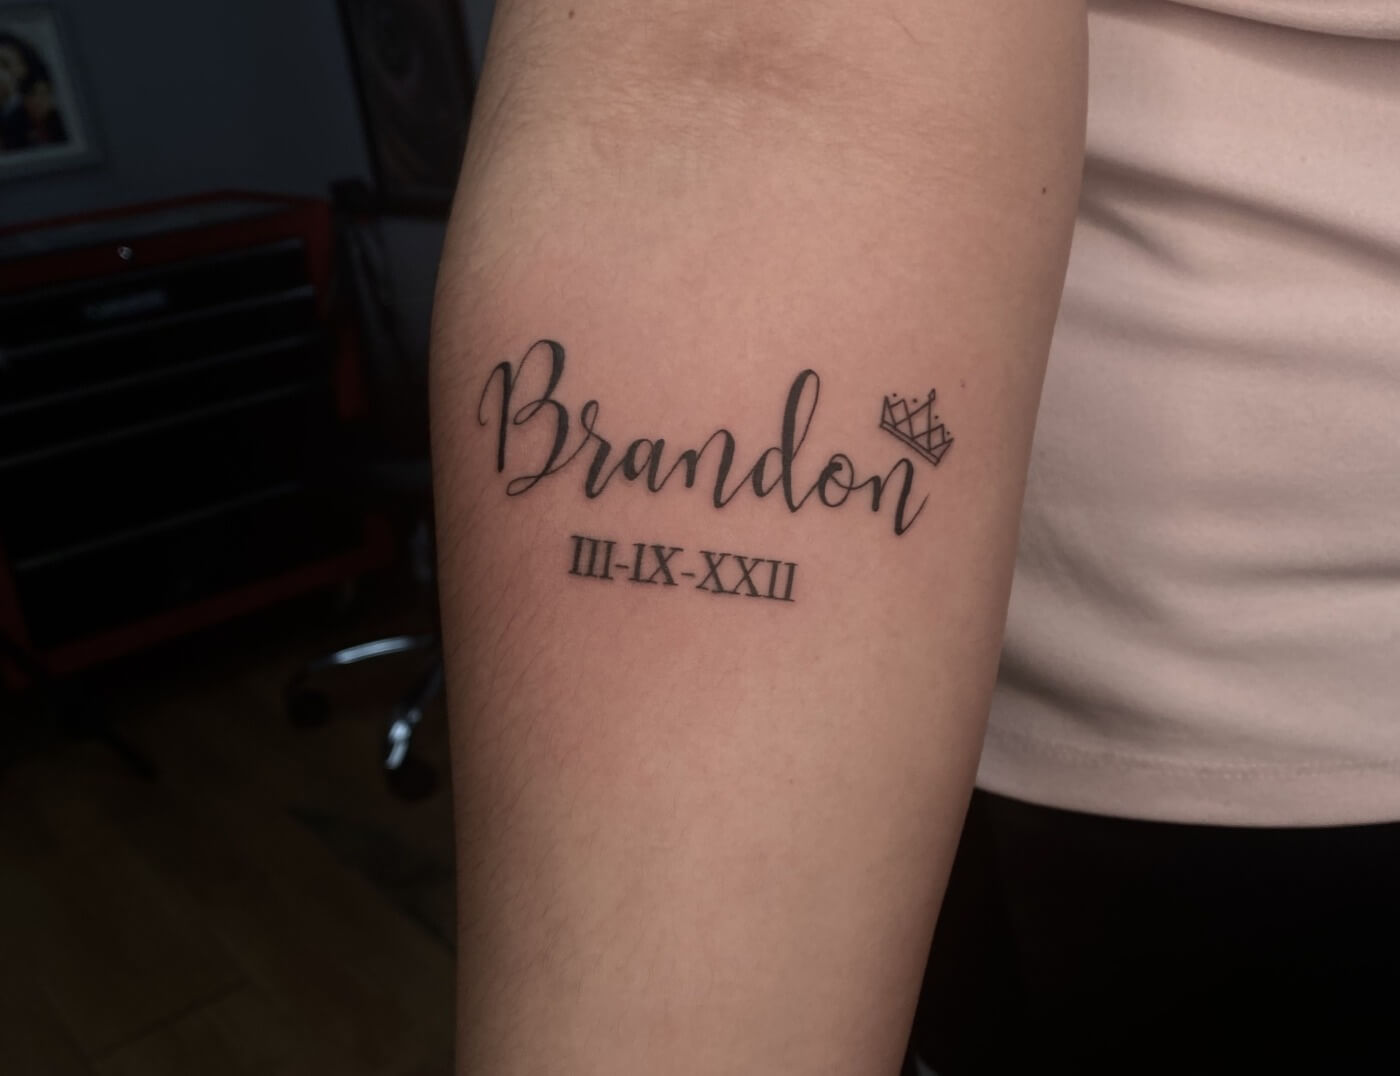 "Brandon" Lettering Tattoo by Rene Cristobal, a guest artist at Iron Palm Tattoos. Rene comes to Atlanta from Concepcion, Chile. Call 404-973-7828 or stop by for a free consultation. We're open late night until 2AM most nights. Walk ins are welcome.